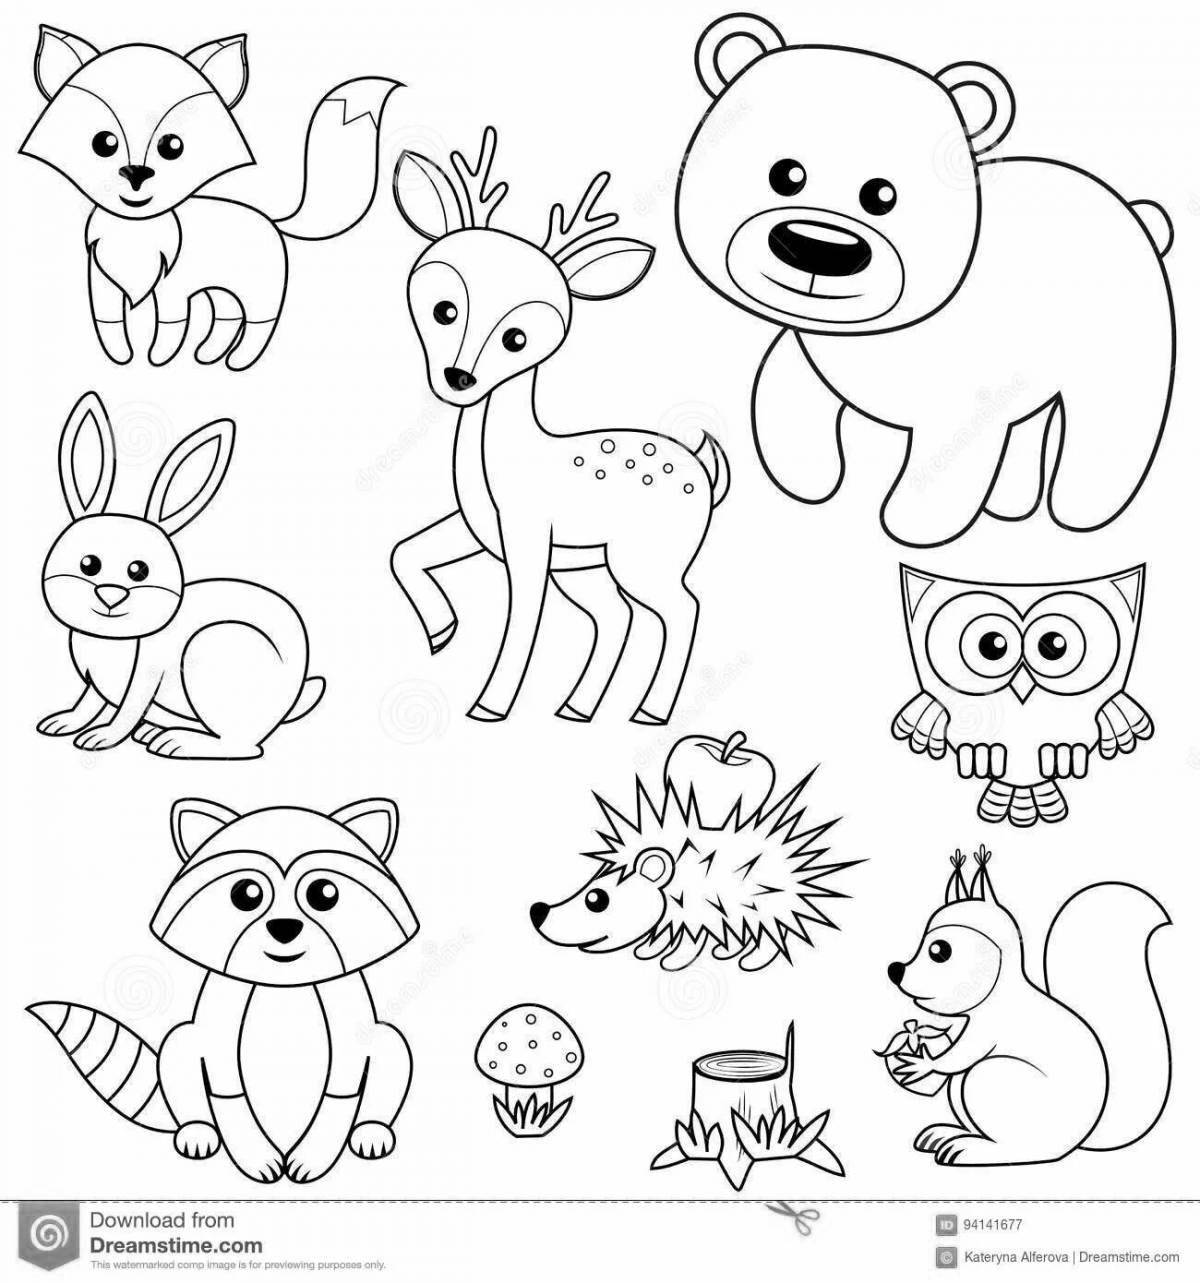 Great forest animal coloring page for 4-5 year olds